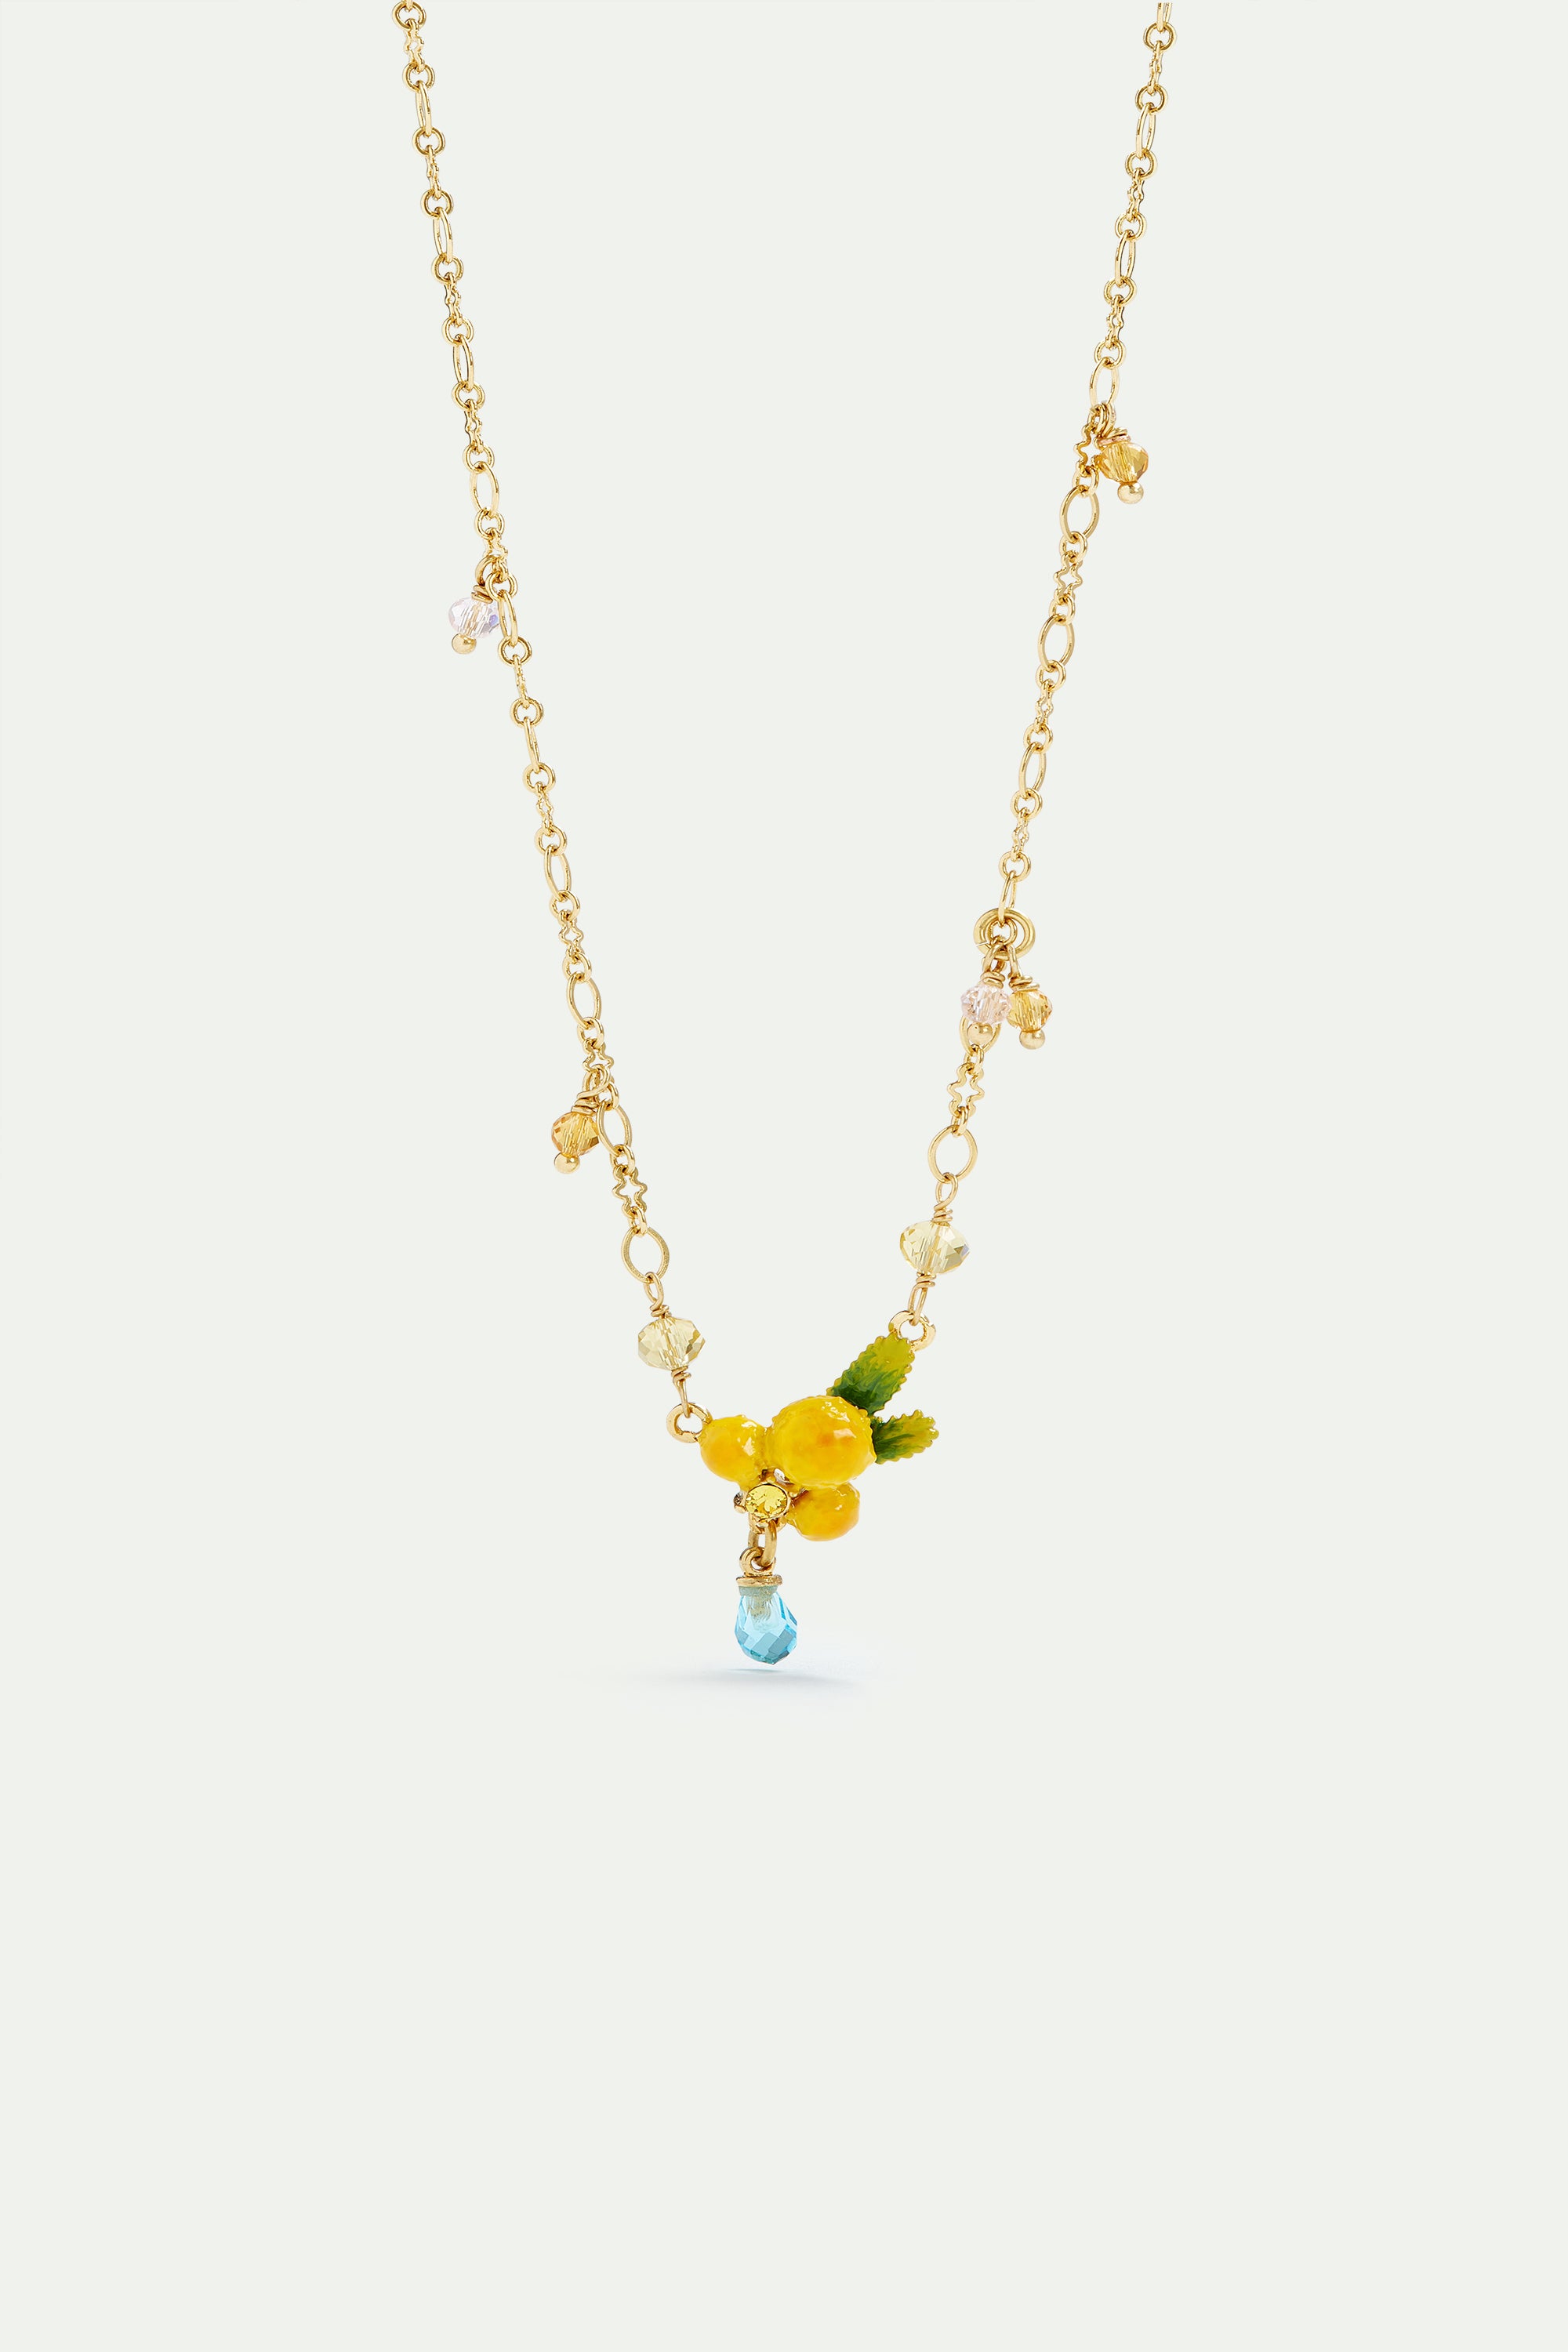 Mimosa flower and little pearls pendant necklace